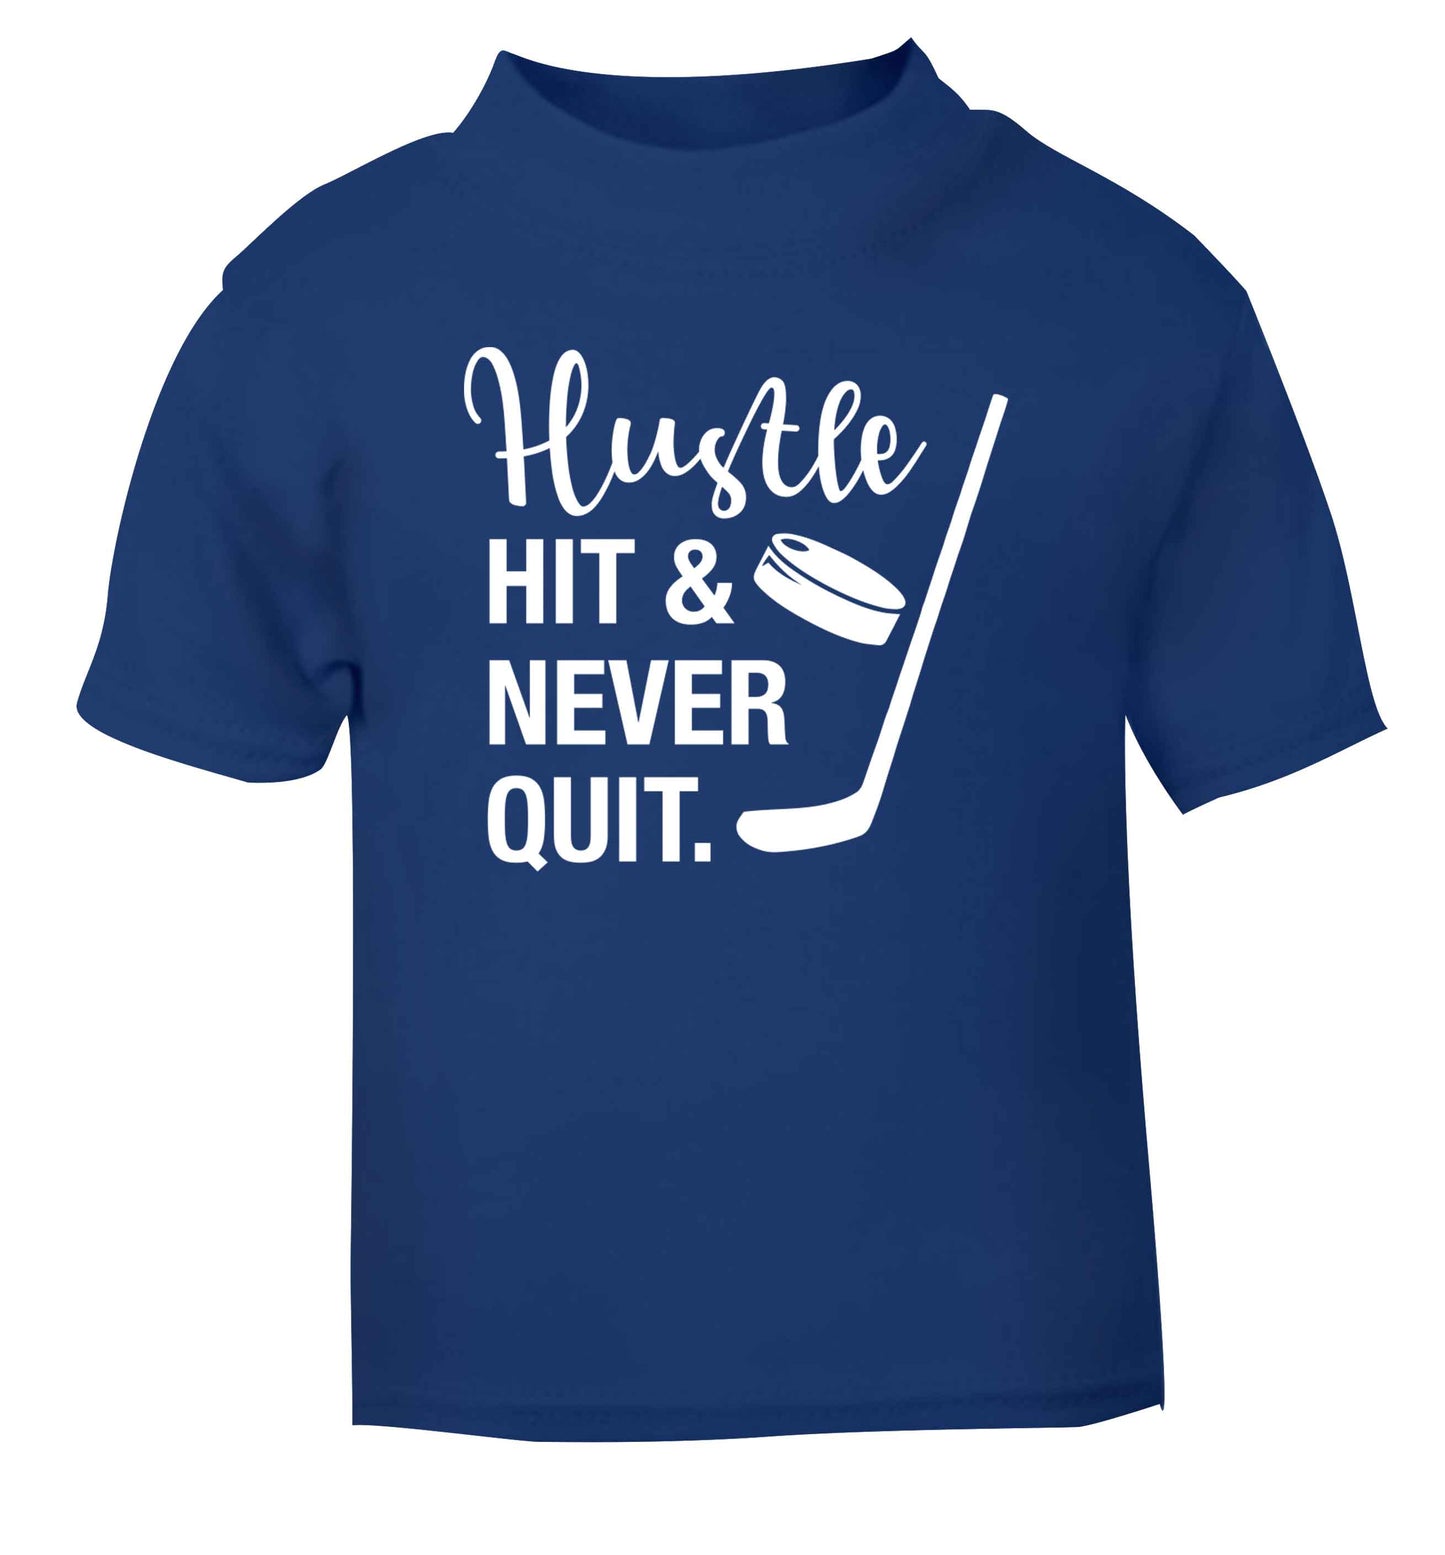 Hustle hit and never quit blue Baby Toddler Tshirt 2 Years